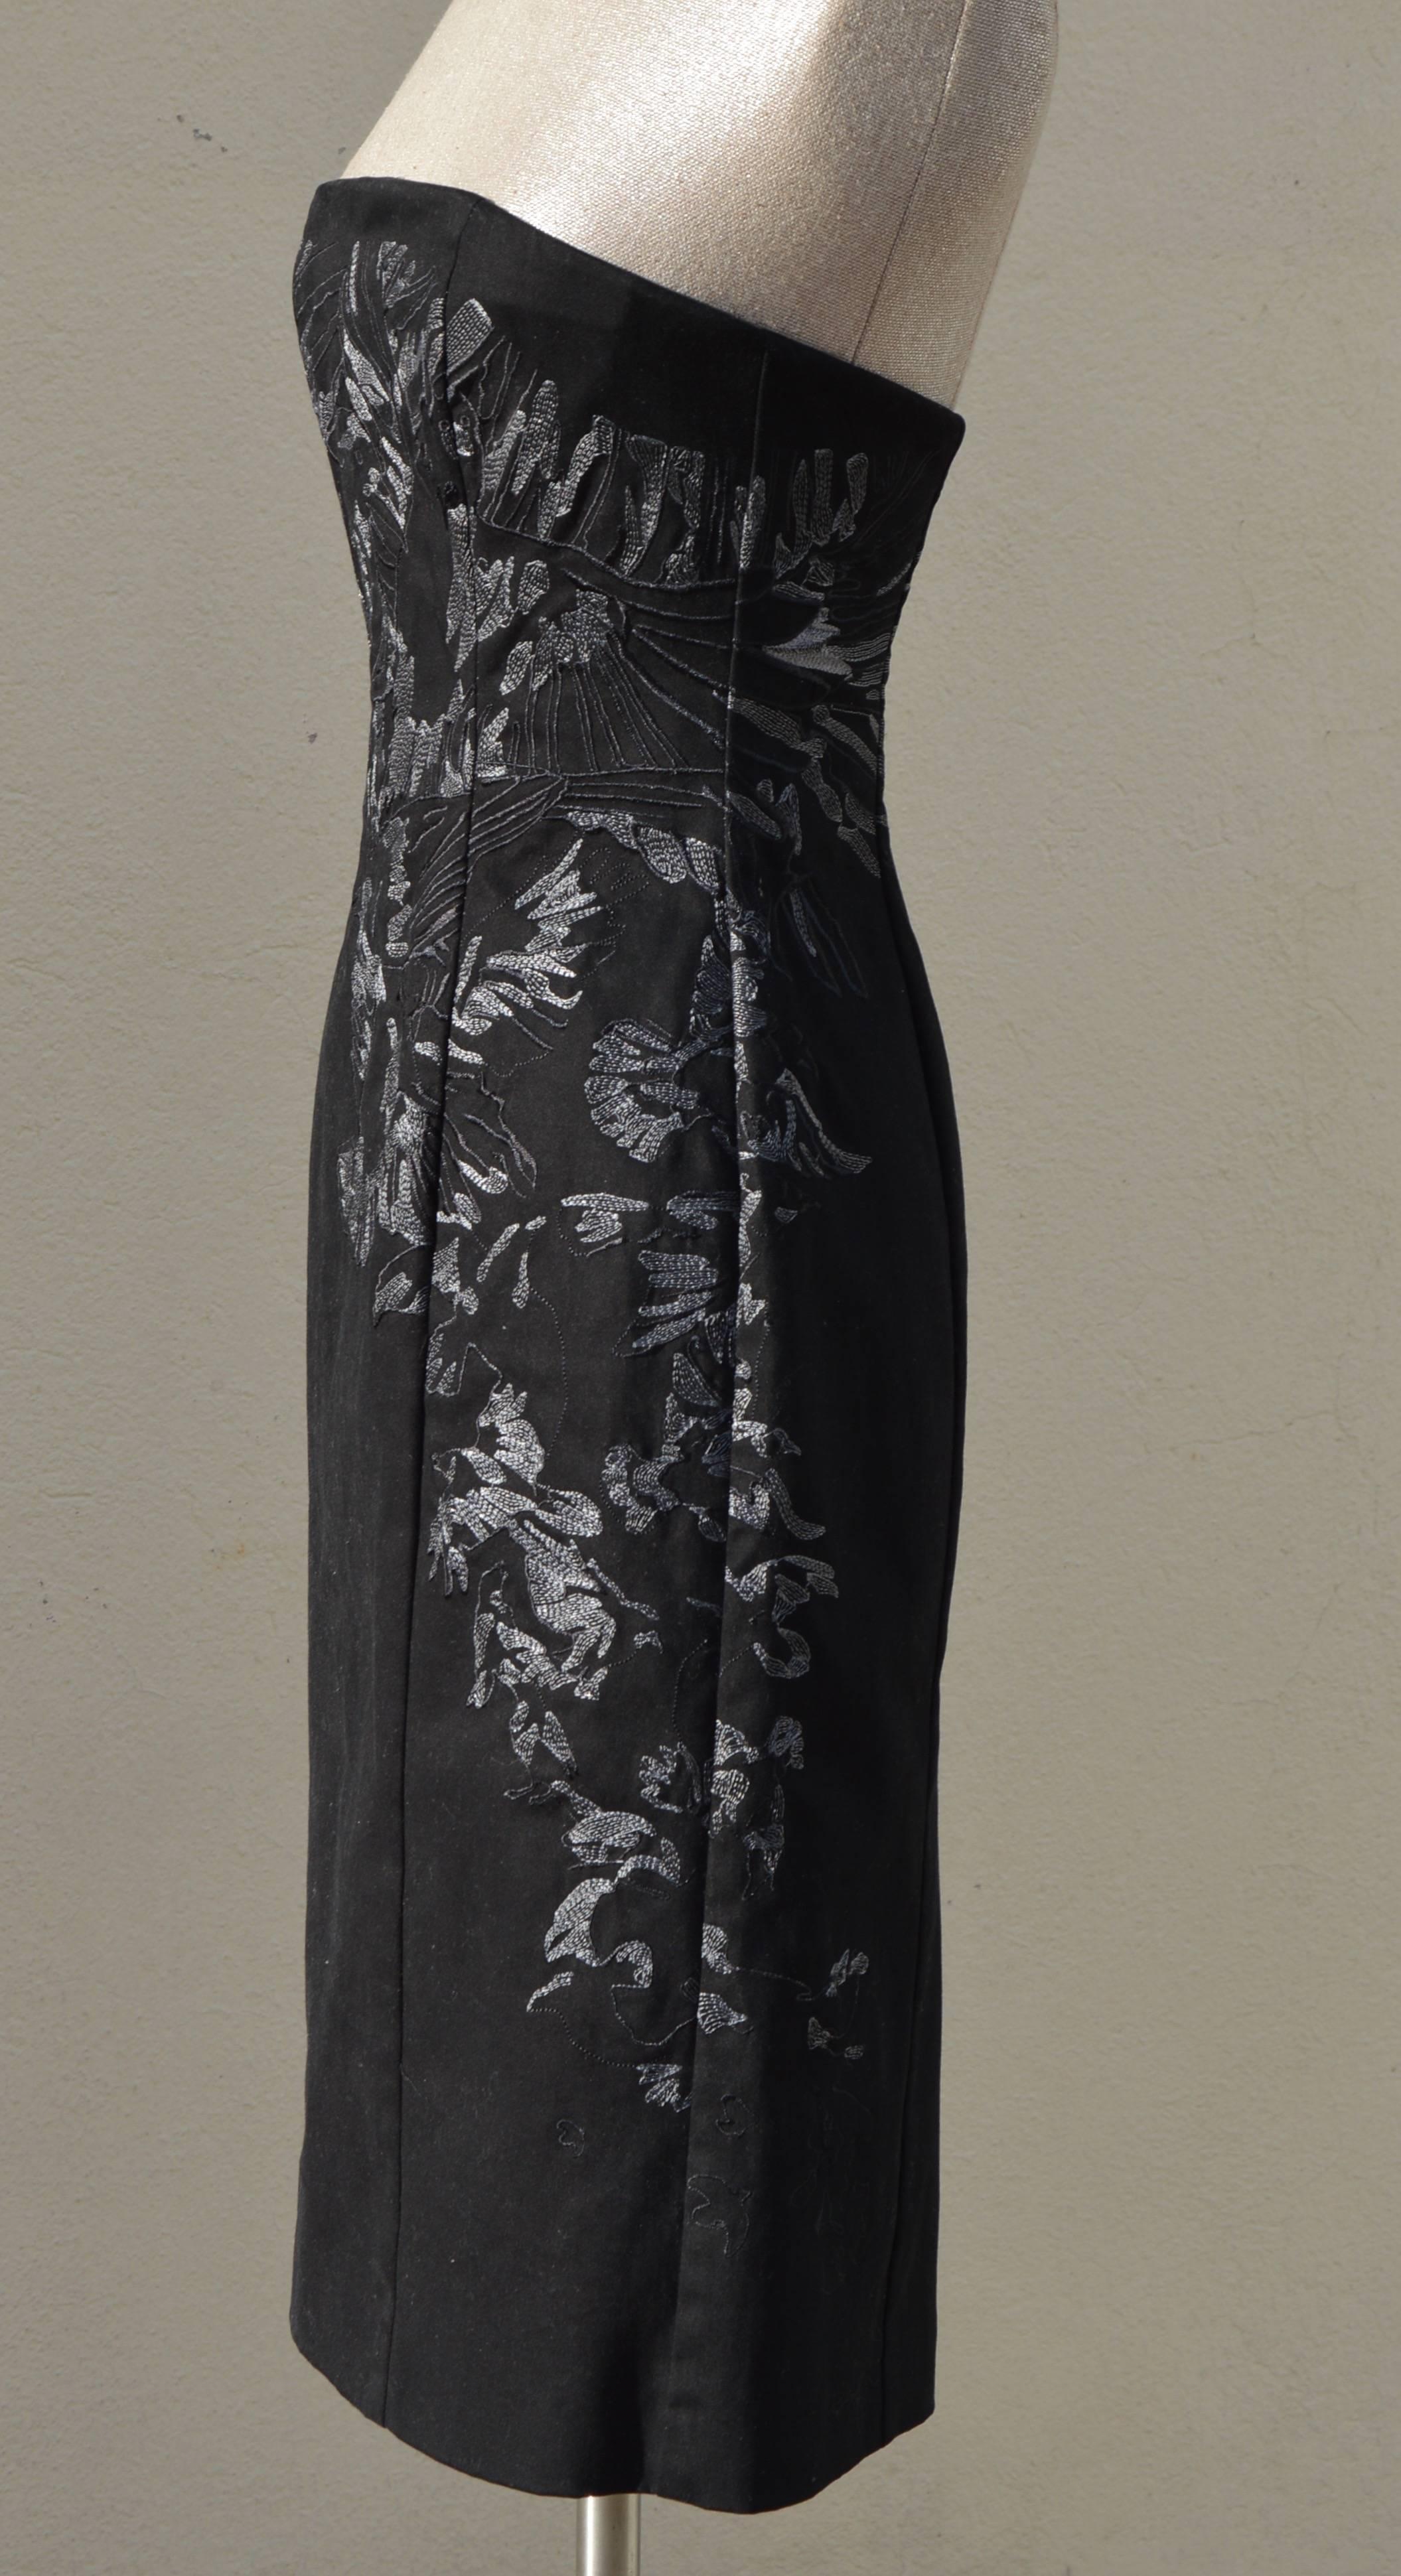 Fabulous Alexander Mcqueen fitted dress with silver grey abstract birds embroideries going from front to discreetly ends backside. Just to die for!!!!
Brand new with tags, Alexander McQueen Black Dress
Material is mixed coton and elastan - Fully